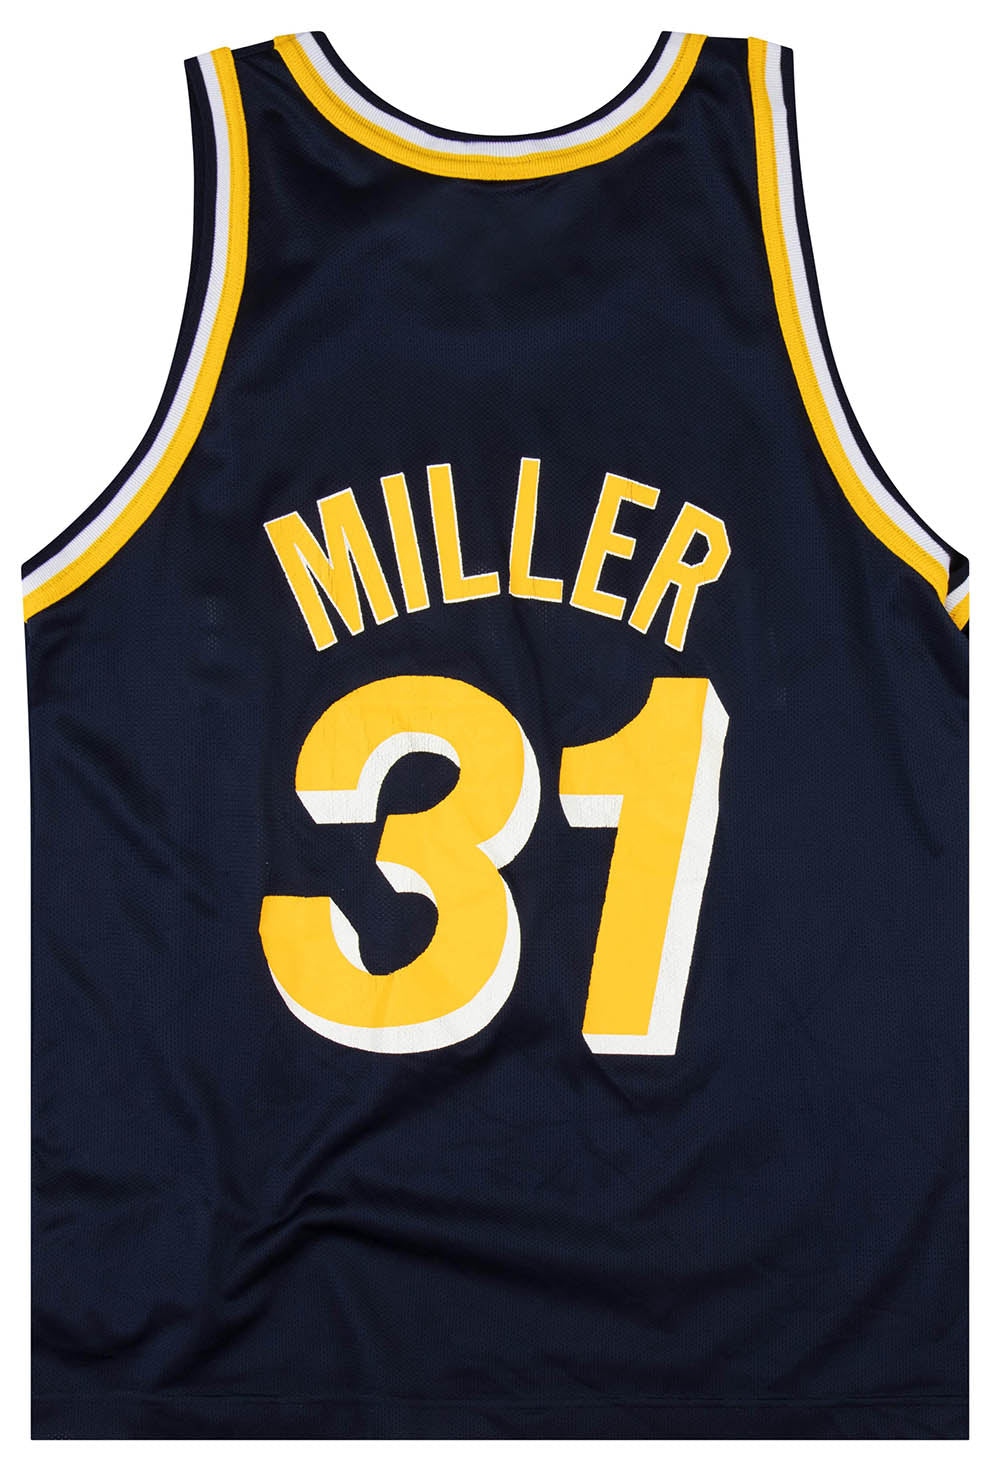 1995-97 INDIANA PACERS MILLER #31 CHAMPION JERSEY (AWAY) L